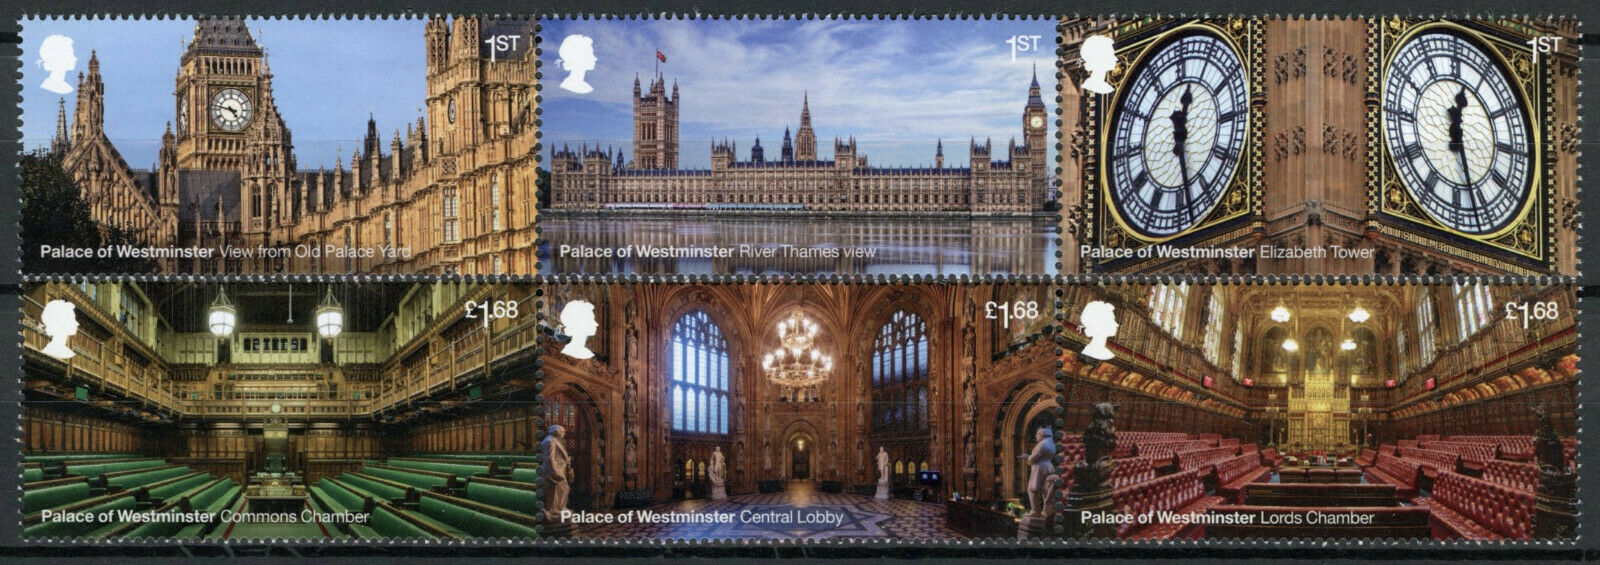 GB Architecture Stamps 2020 MNH Palace of Westminster Big Ben 6v Set in 2 Strips